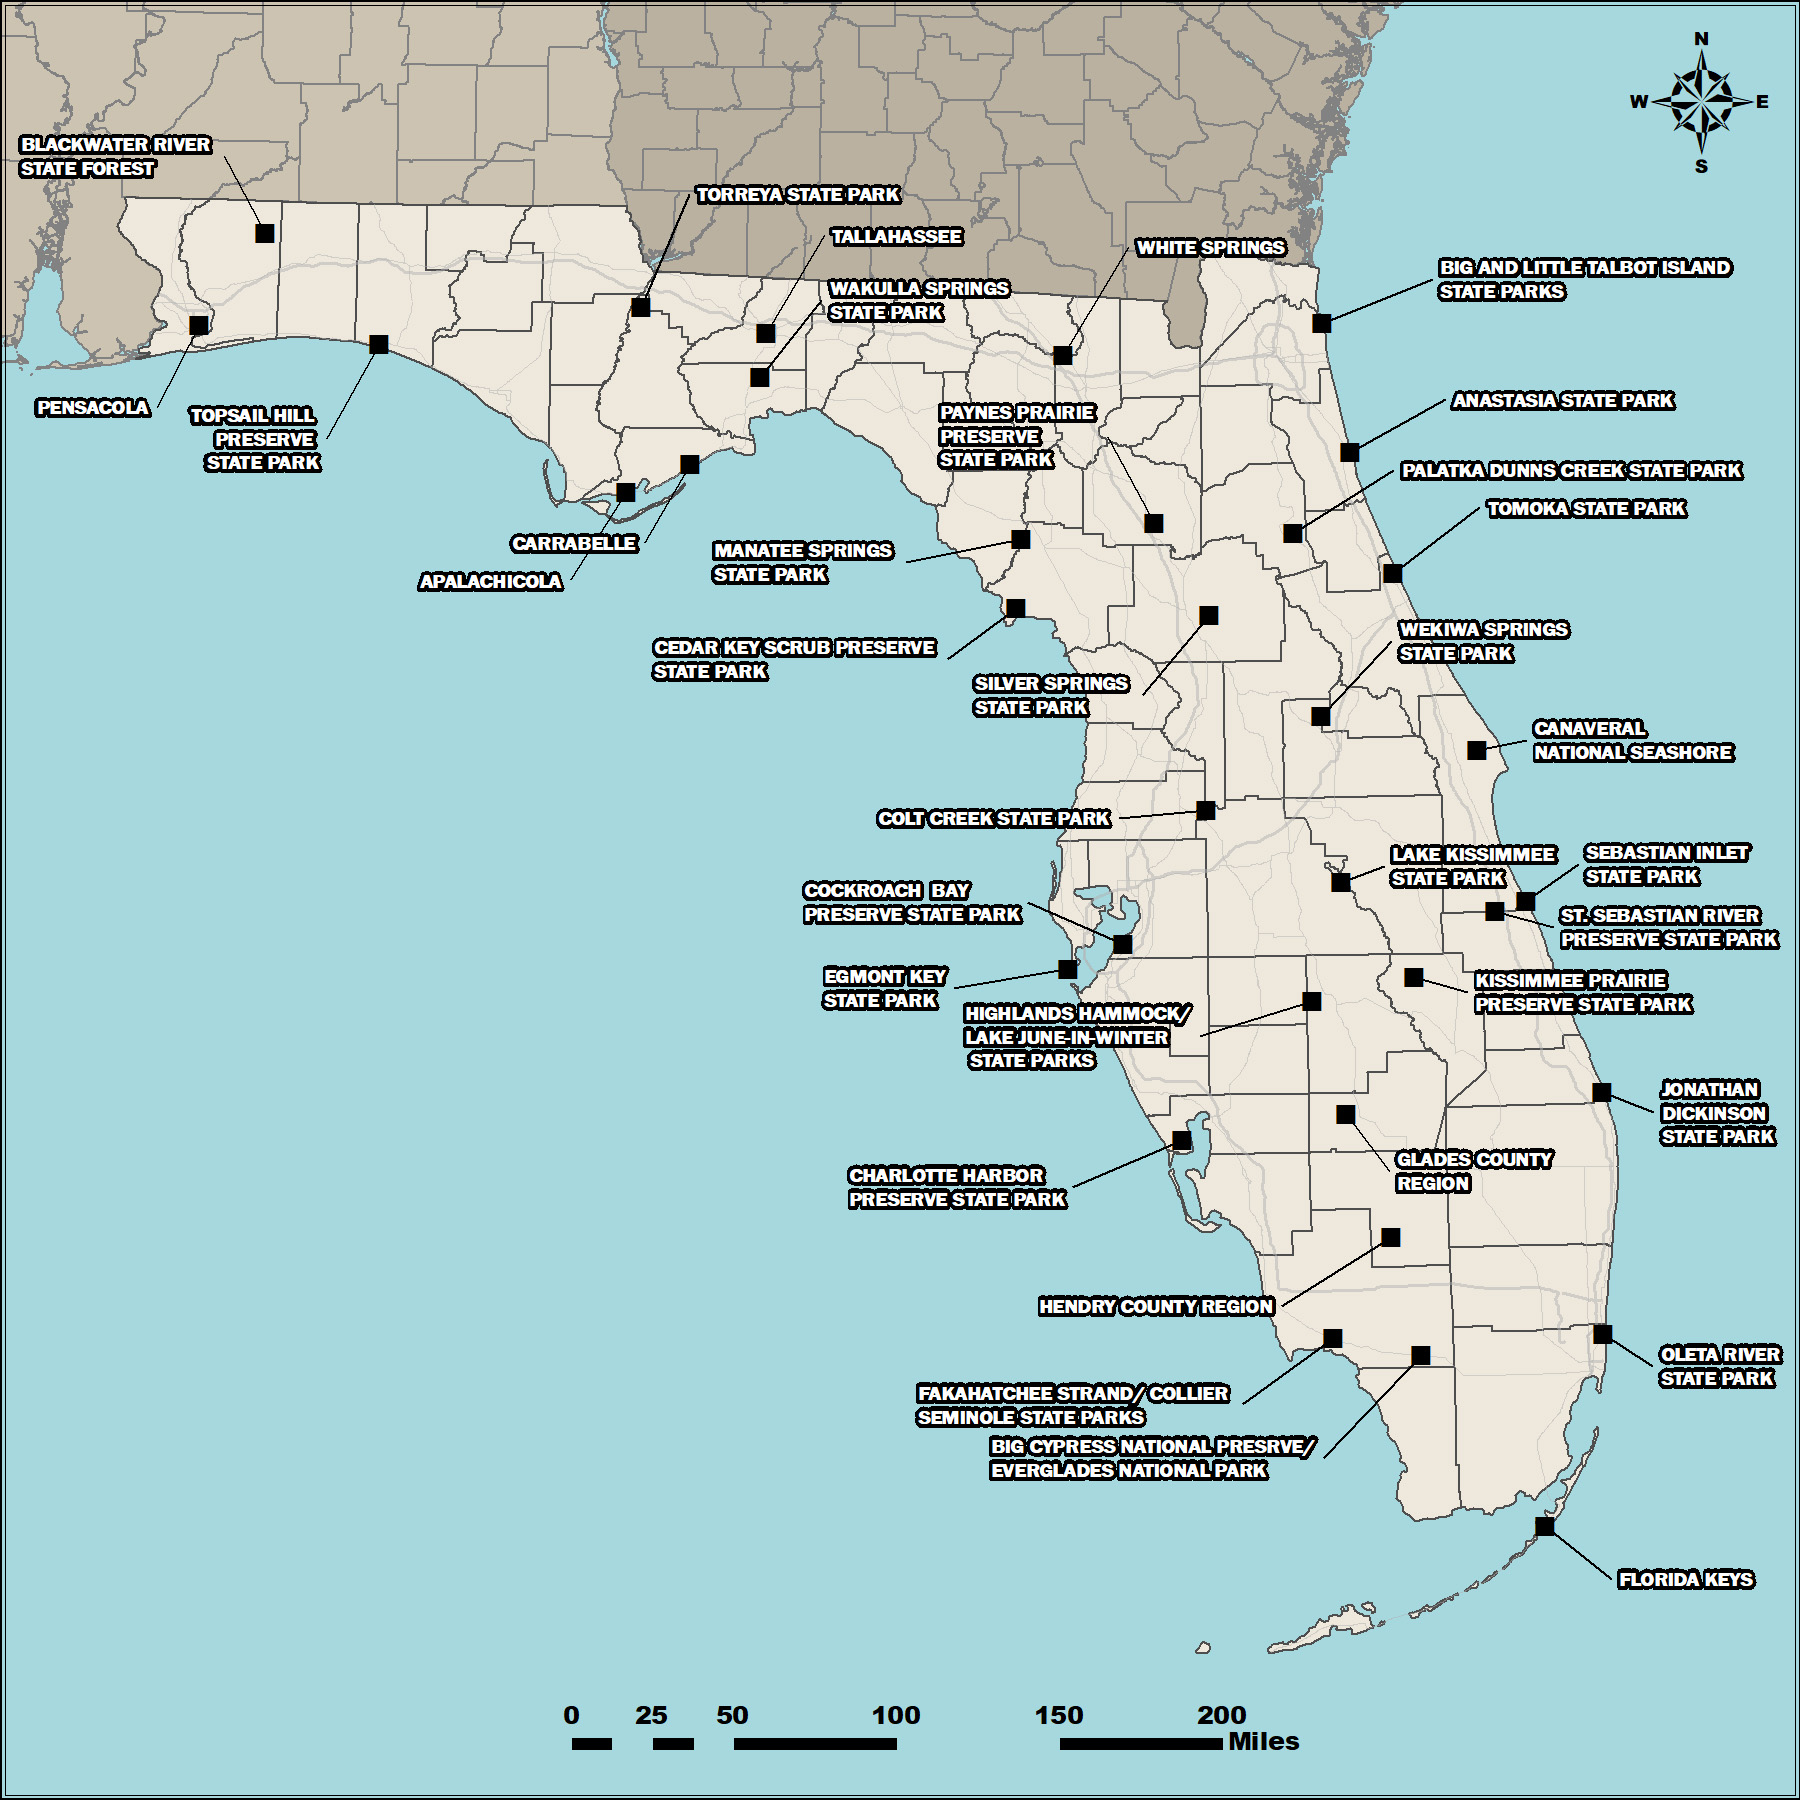 Real Florida Guides statewide map showing all locations that are featured